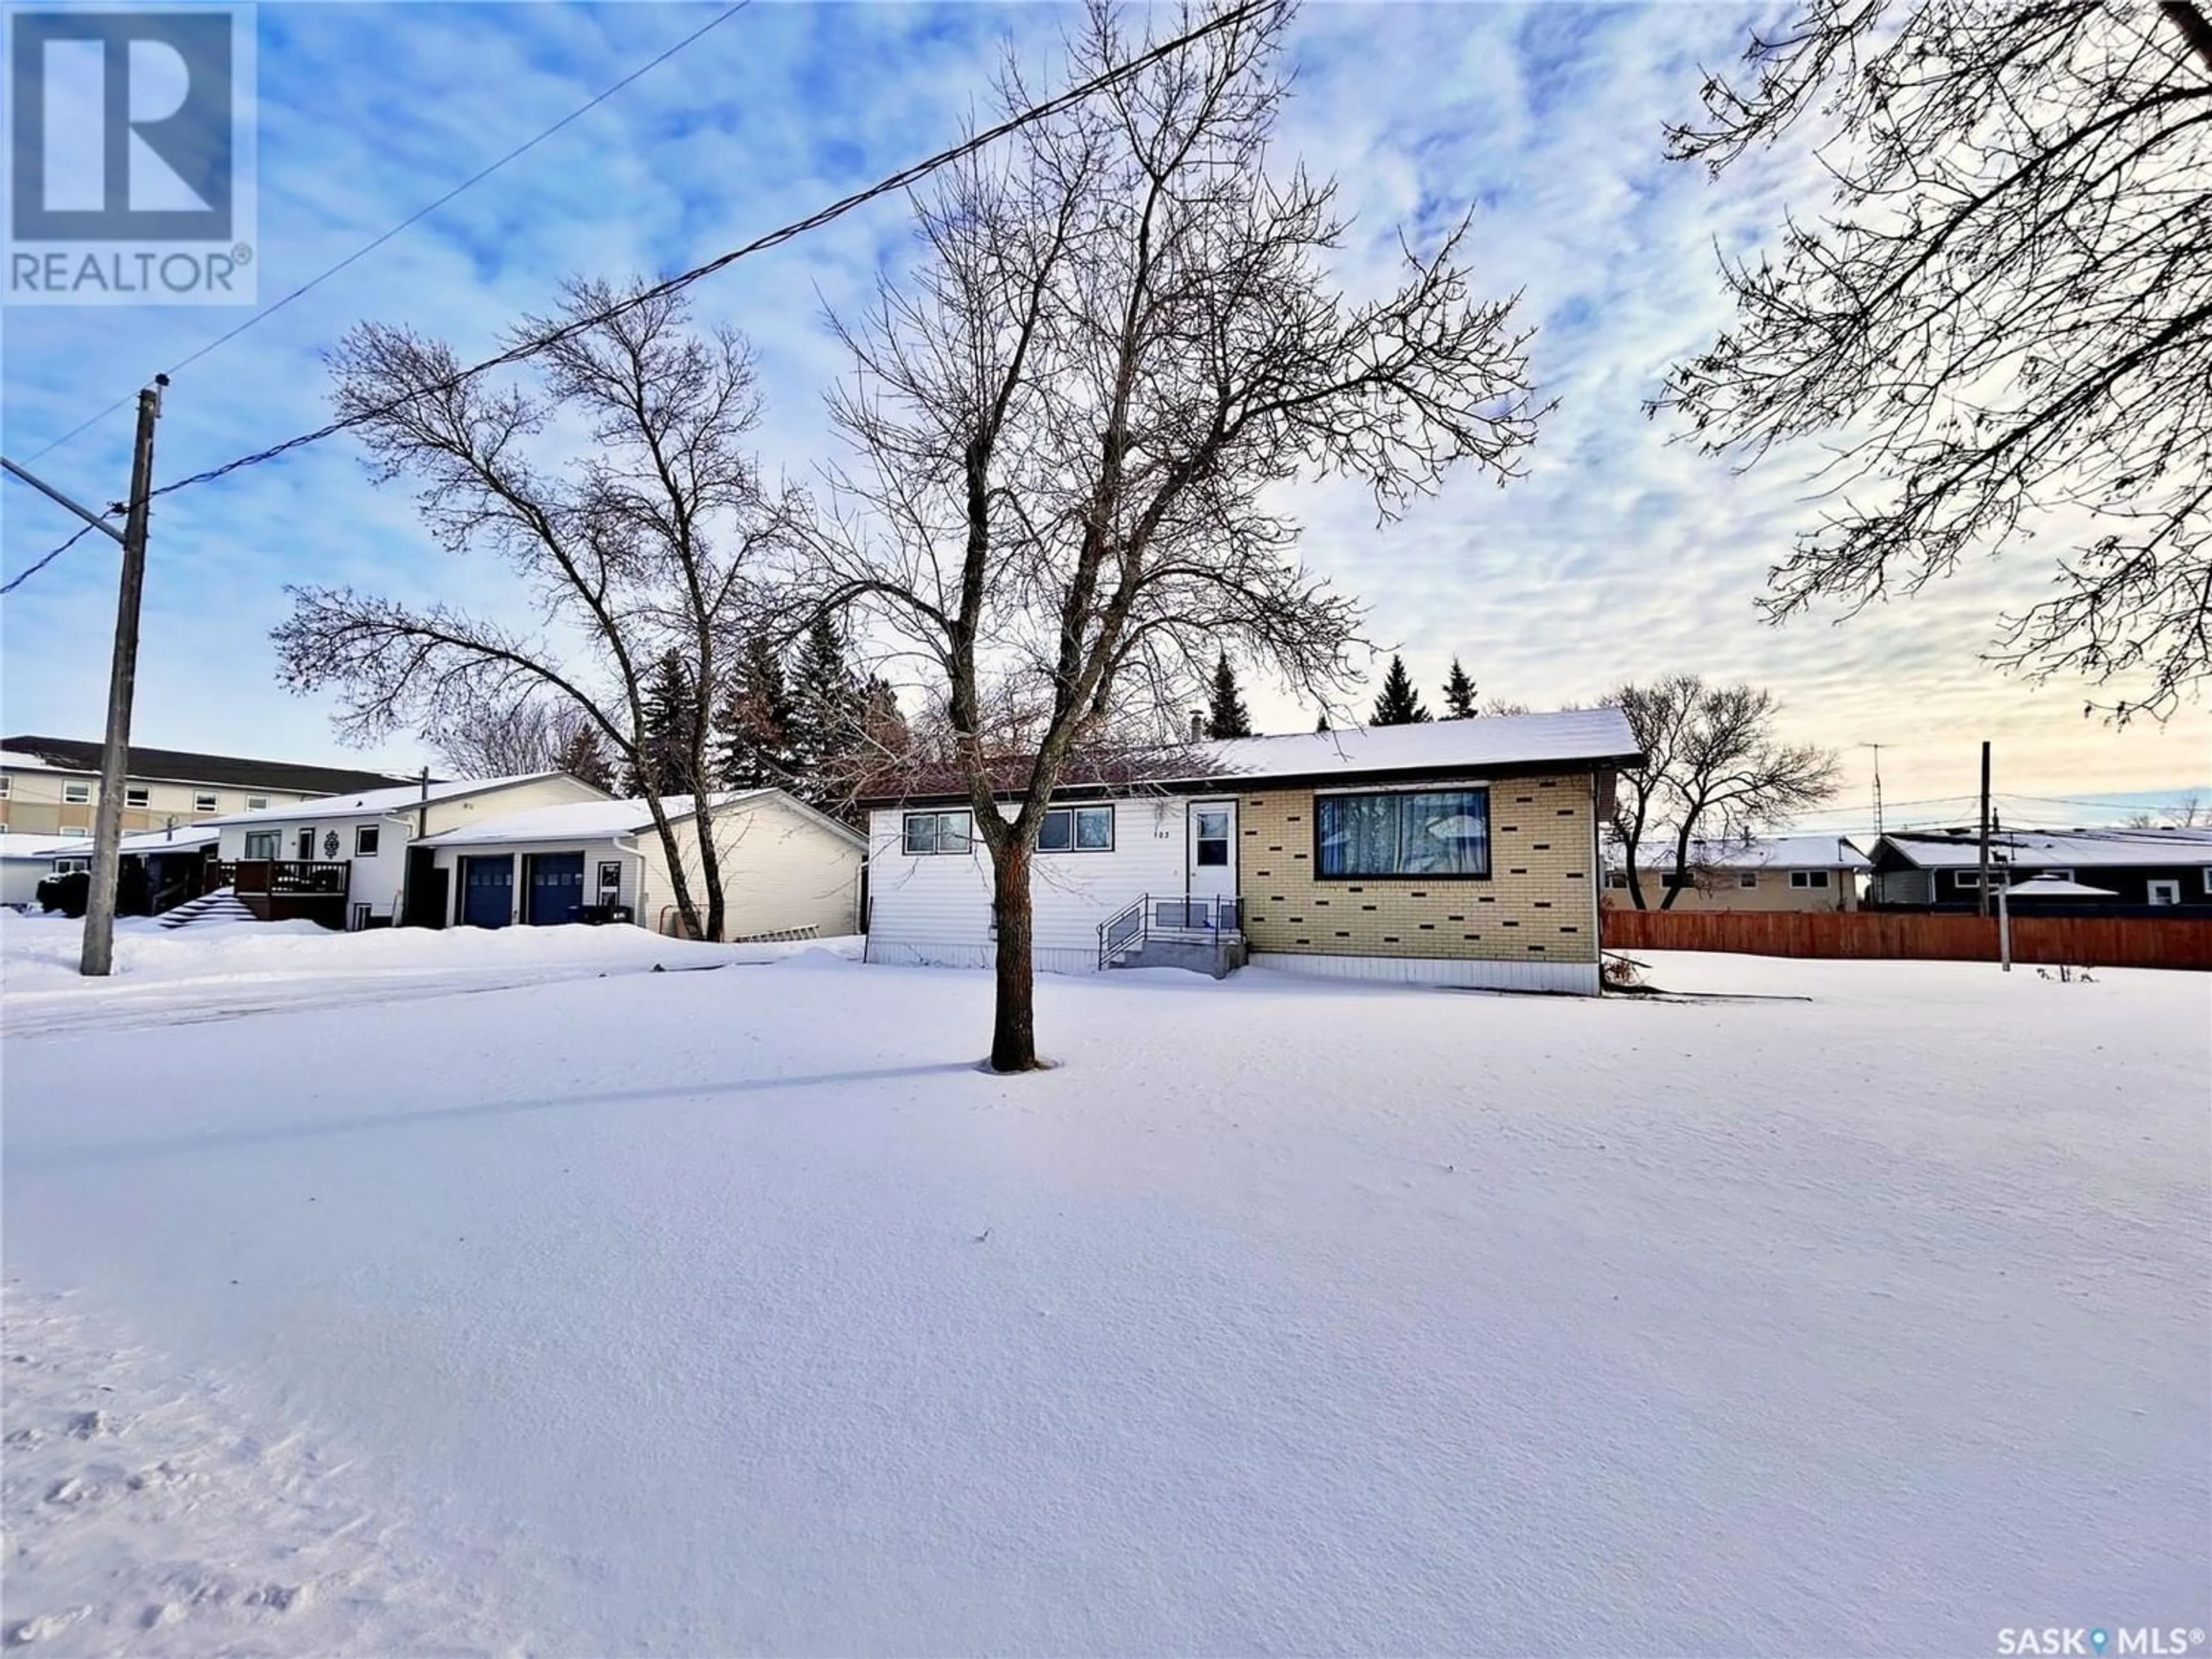 Home with unknown exterior material for 103 Henry STREET, Moosomin Saskatchewan S0G3N0